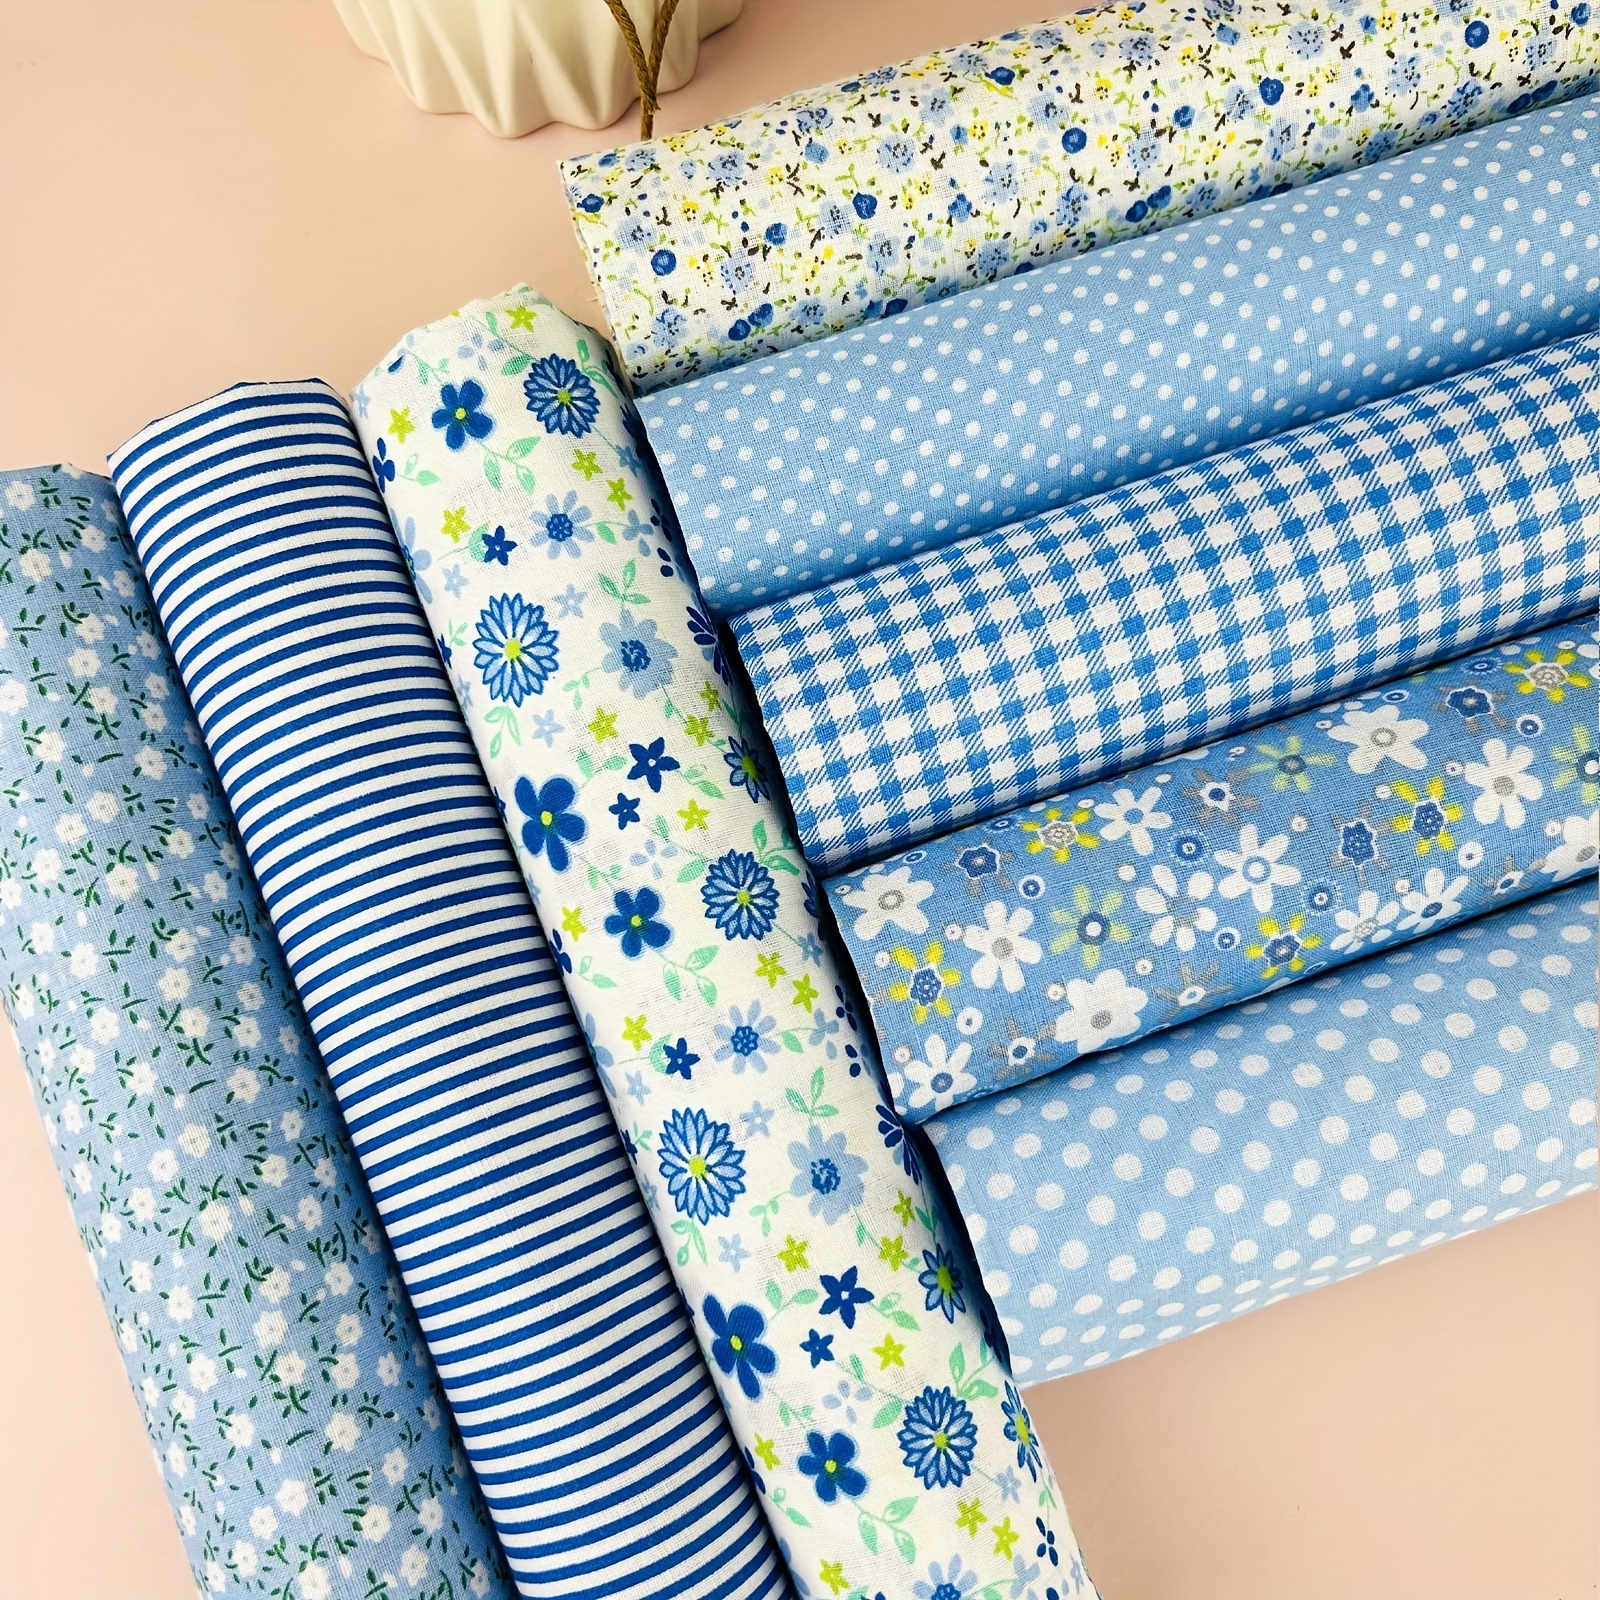 

8pcs Blue Cotton Fabric Quilting Cotton Patchwork Diy Handmade Doll Clothes Fabric And Doll Packaging Fabrics, Diy Sewing Craft Supplies